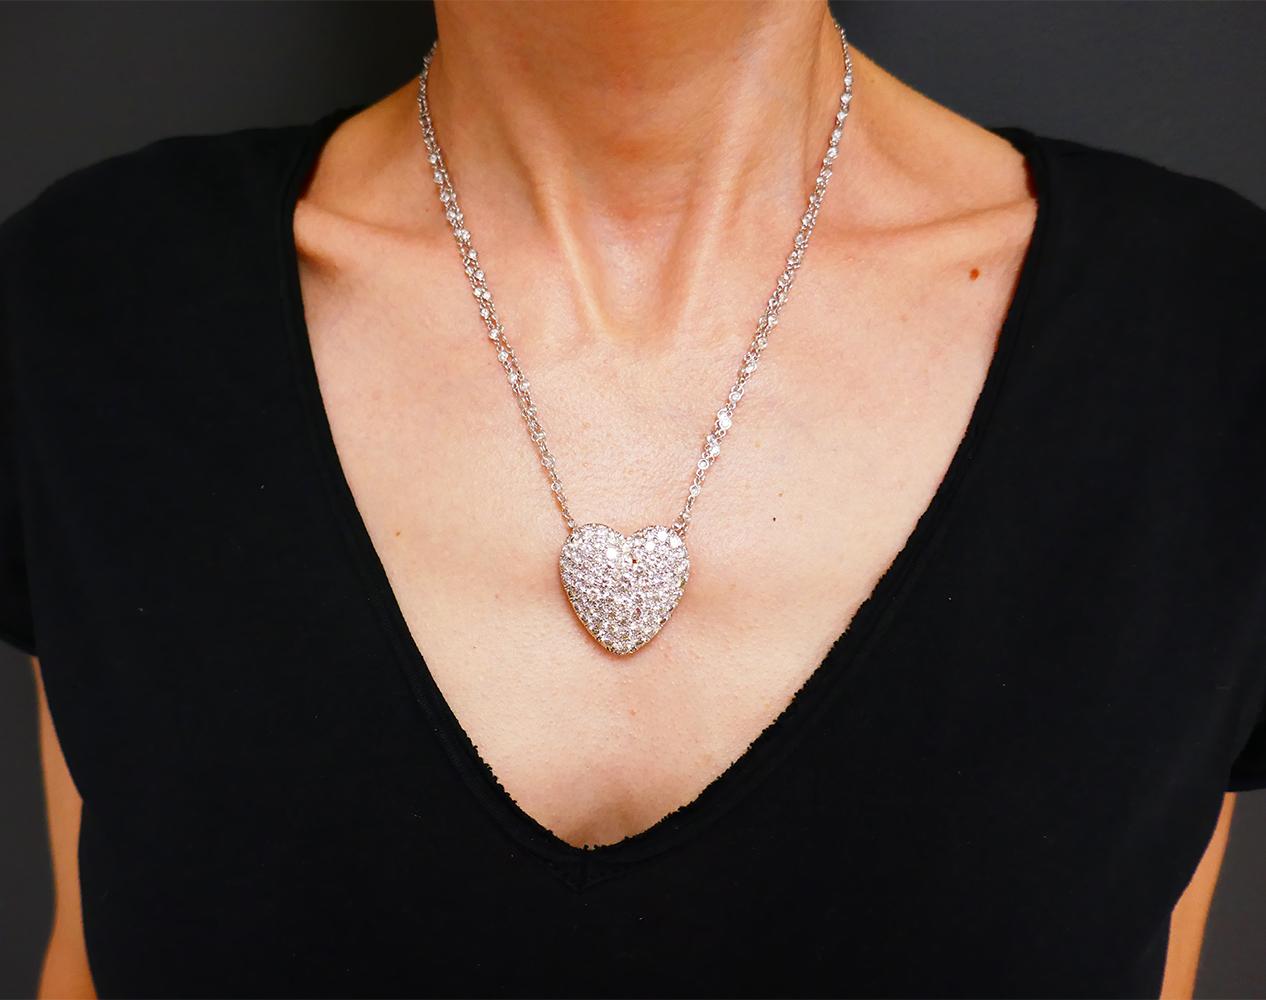 A feminine diamond Heart 14k gold necklace. Comprised of a diamond heart-shaped pendant and a diamond by the yard chain necklace.
The heart pendant features pave set diamonds in a white gold frame. Diamonds’ size graduate from the center to the